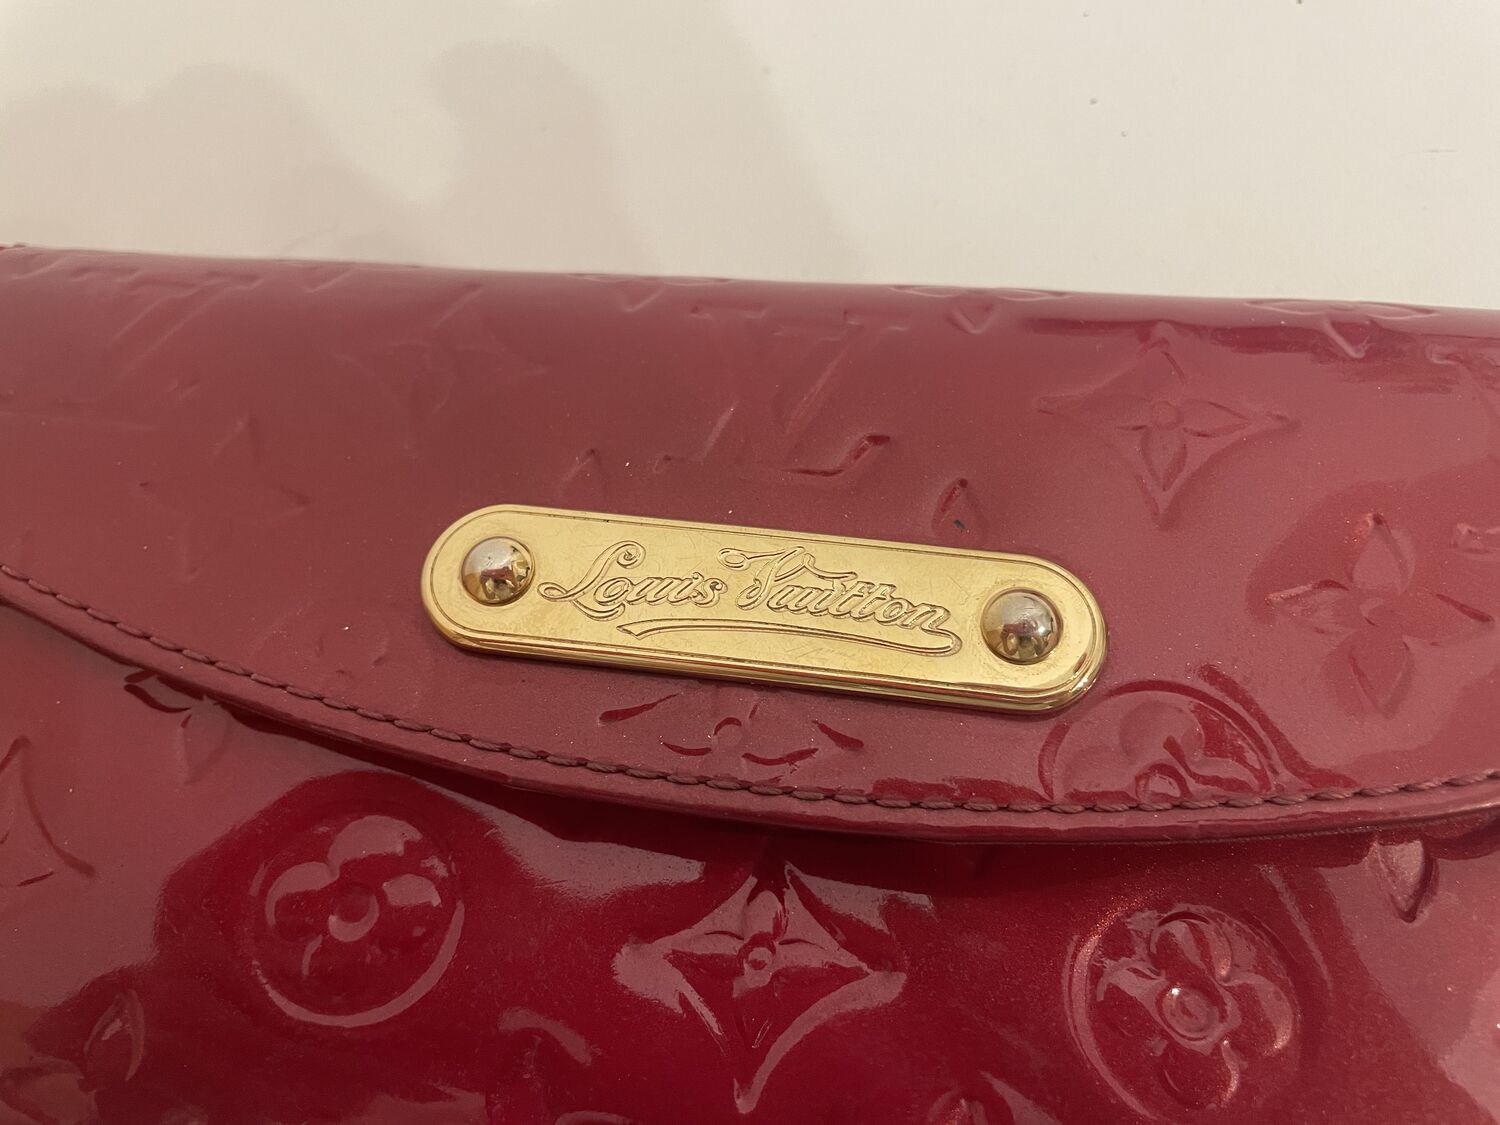 Patent Clutch bag Louis Vuitton, buy pre-owned at 600 EUR